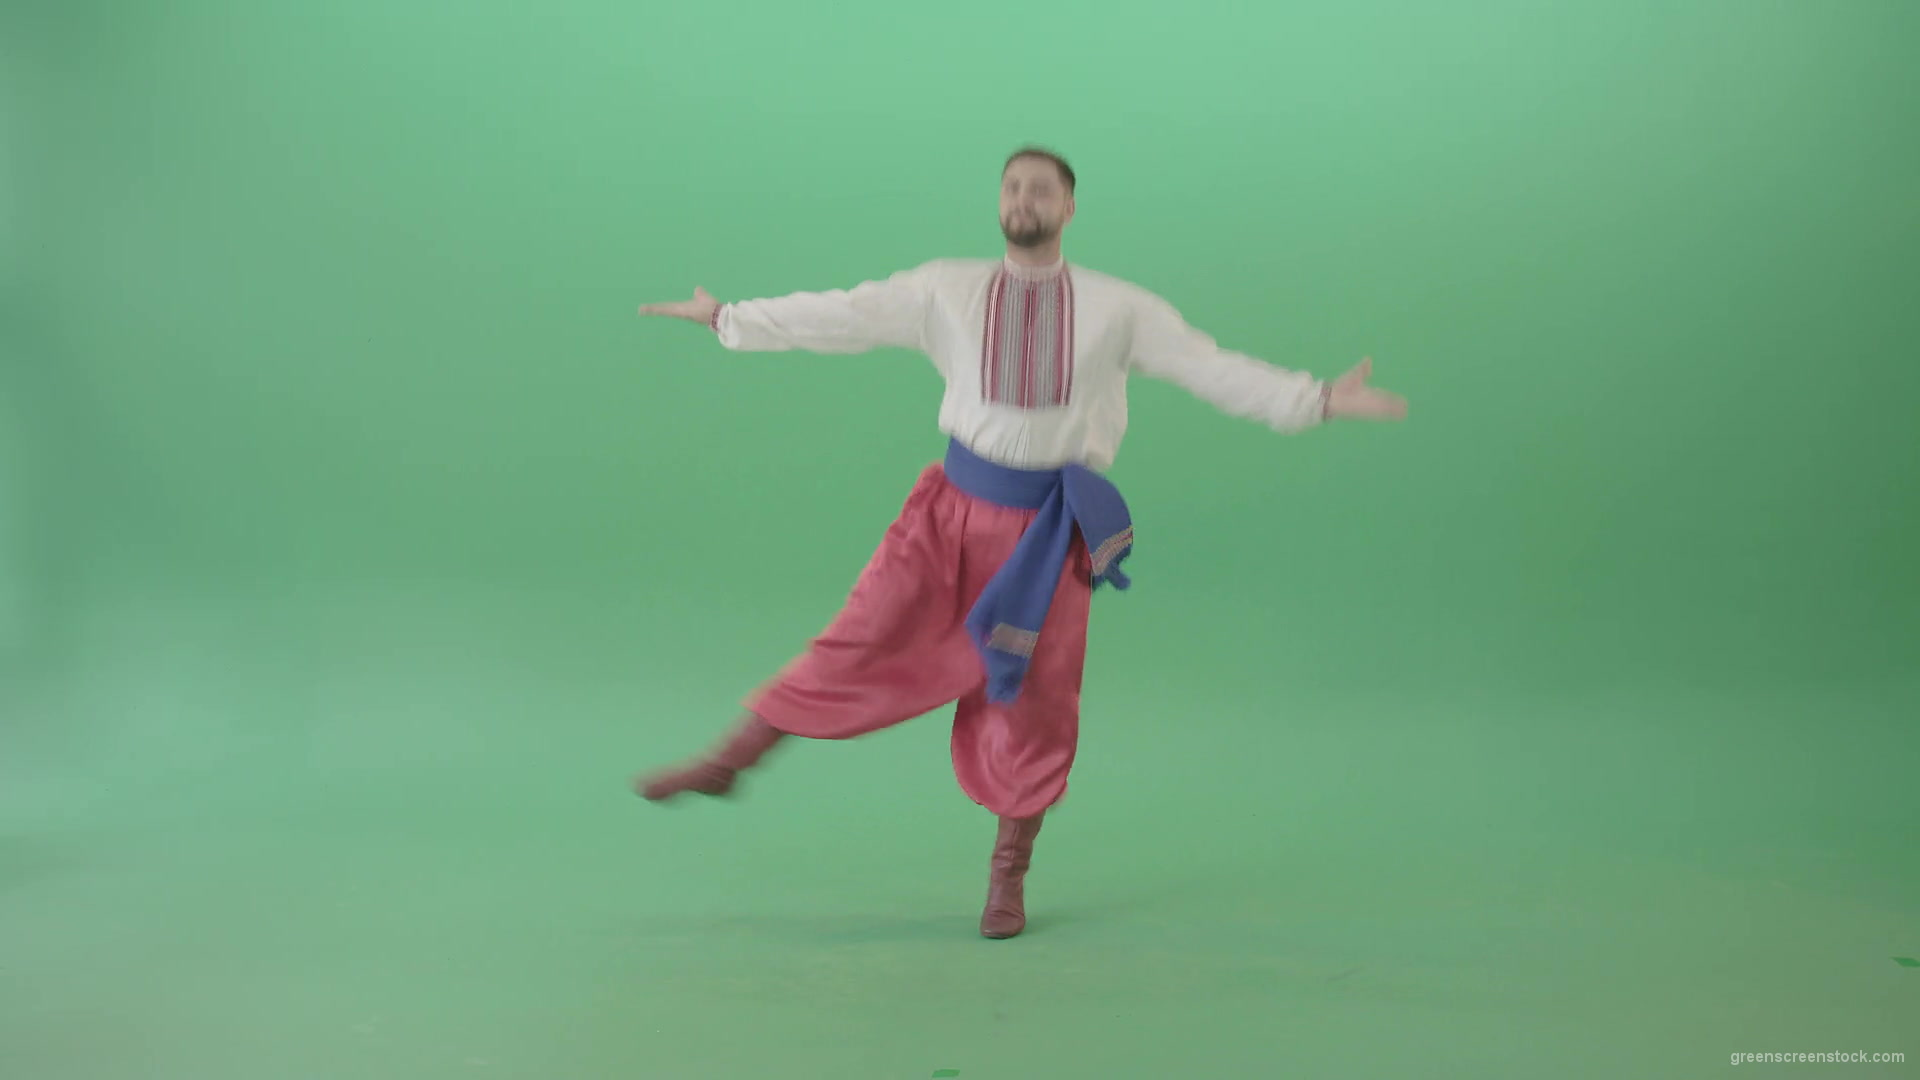 Slavic-Ukraine-folk-dance-by-UA-Cossack-man-jumping-isolated-on-Green-Background-4K-Video-Footage-1920_002 Green Screen Stock